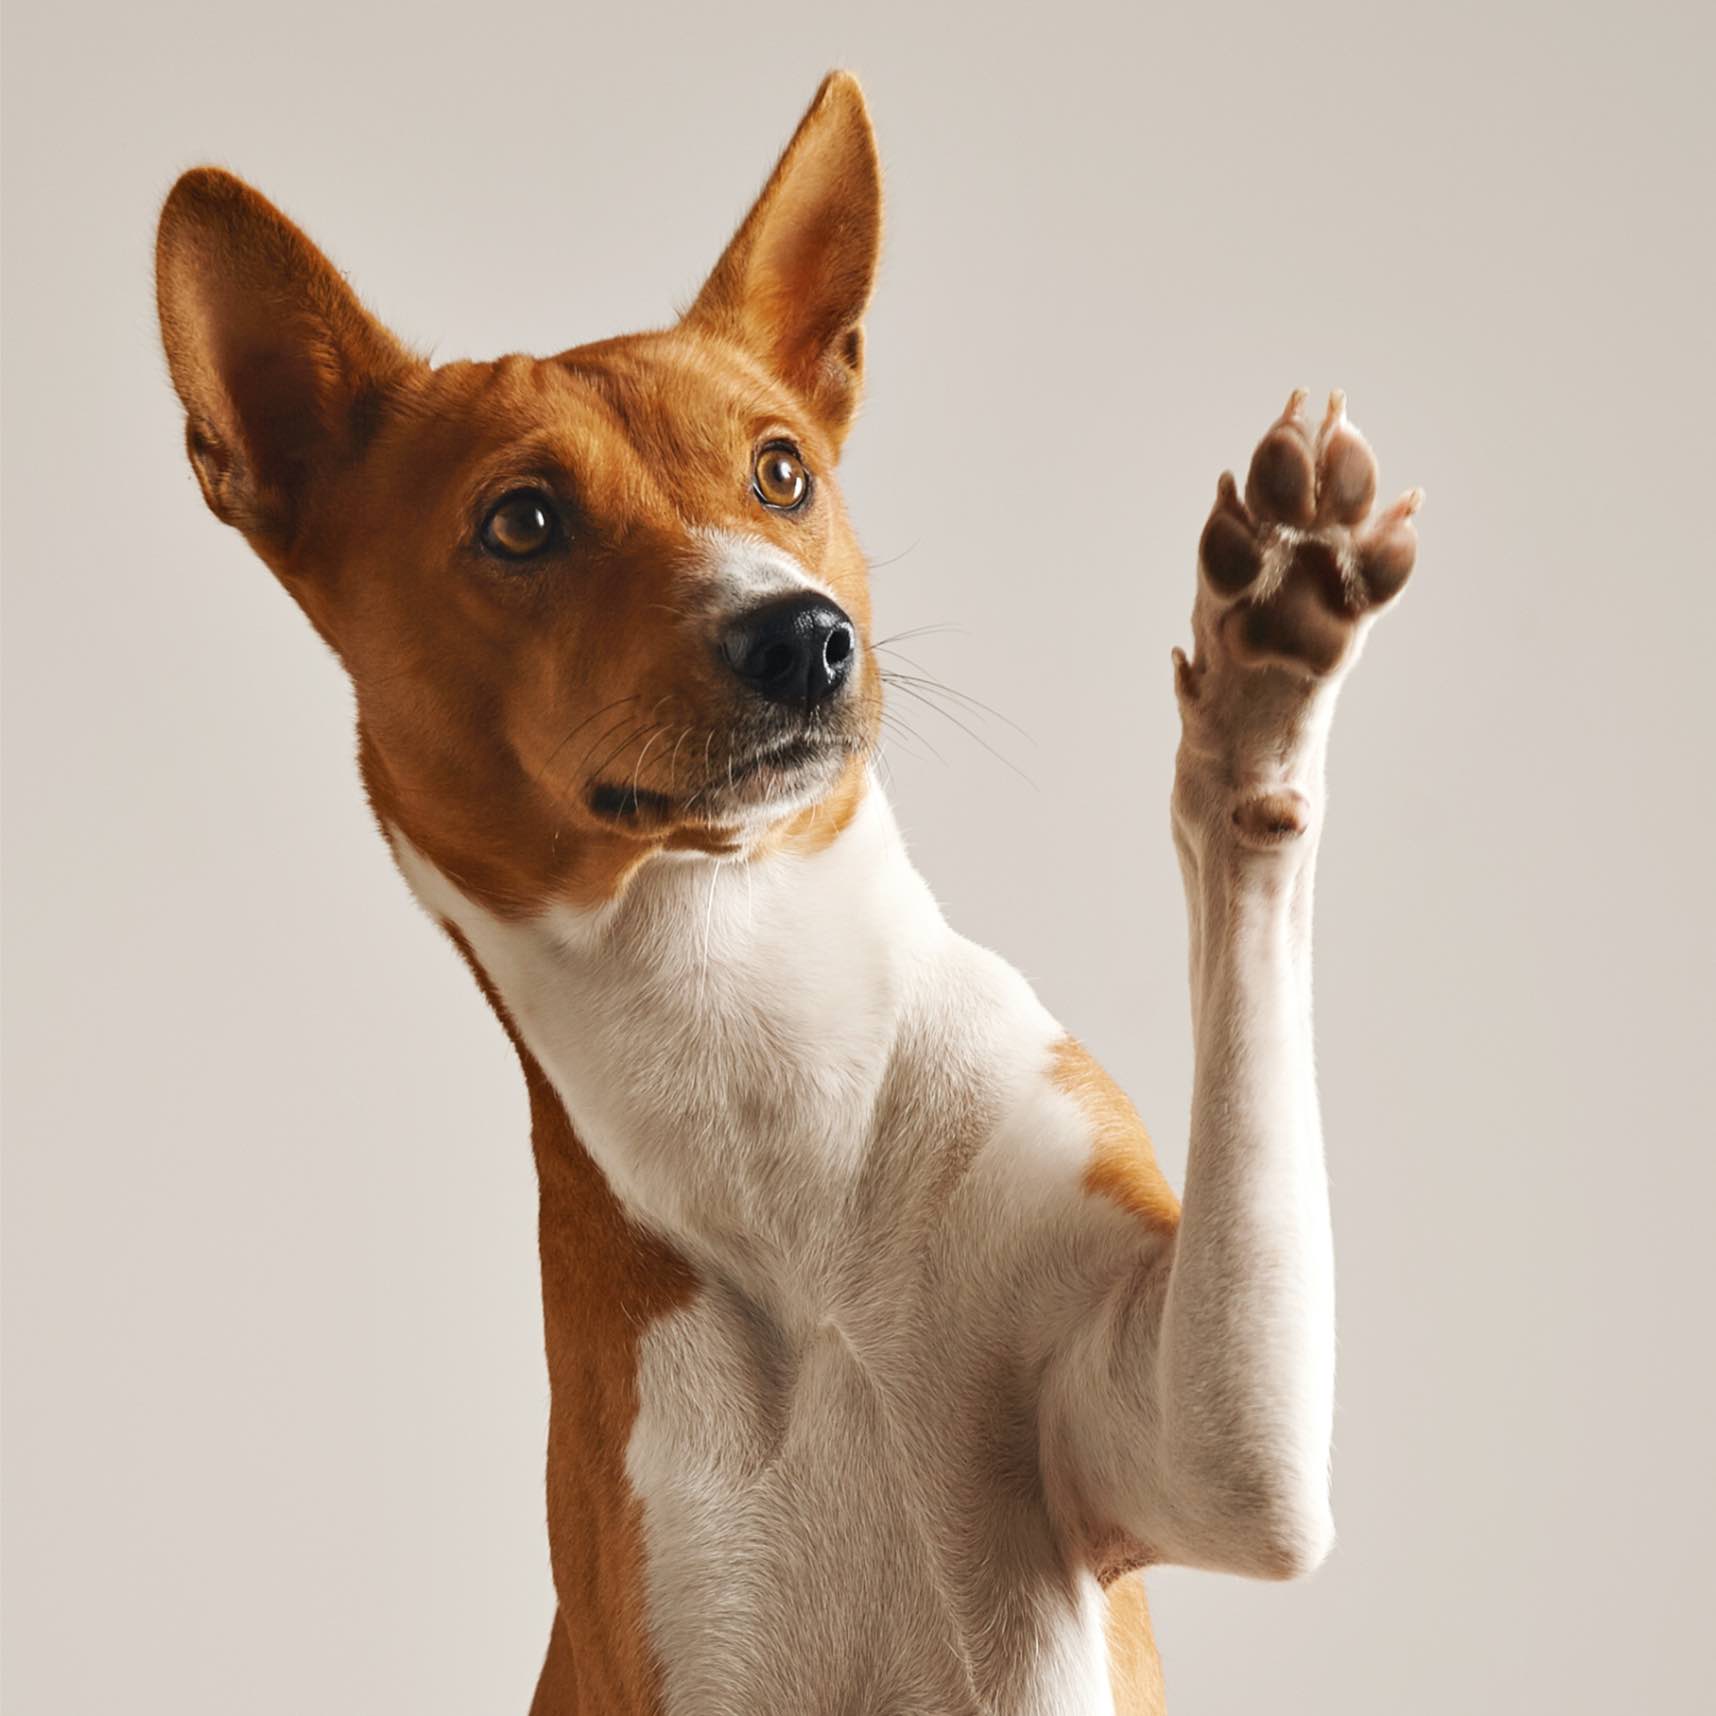 An adorable puppy raising their paw in the air - training services provided by Dog Training Elite.